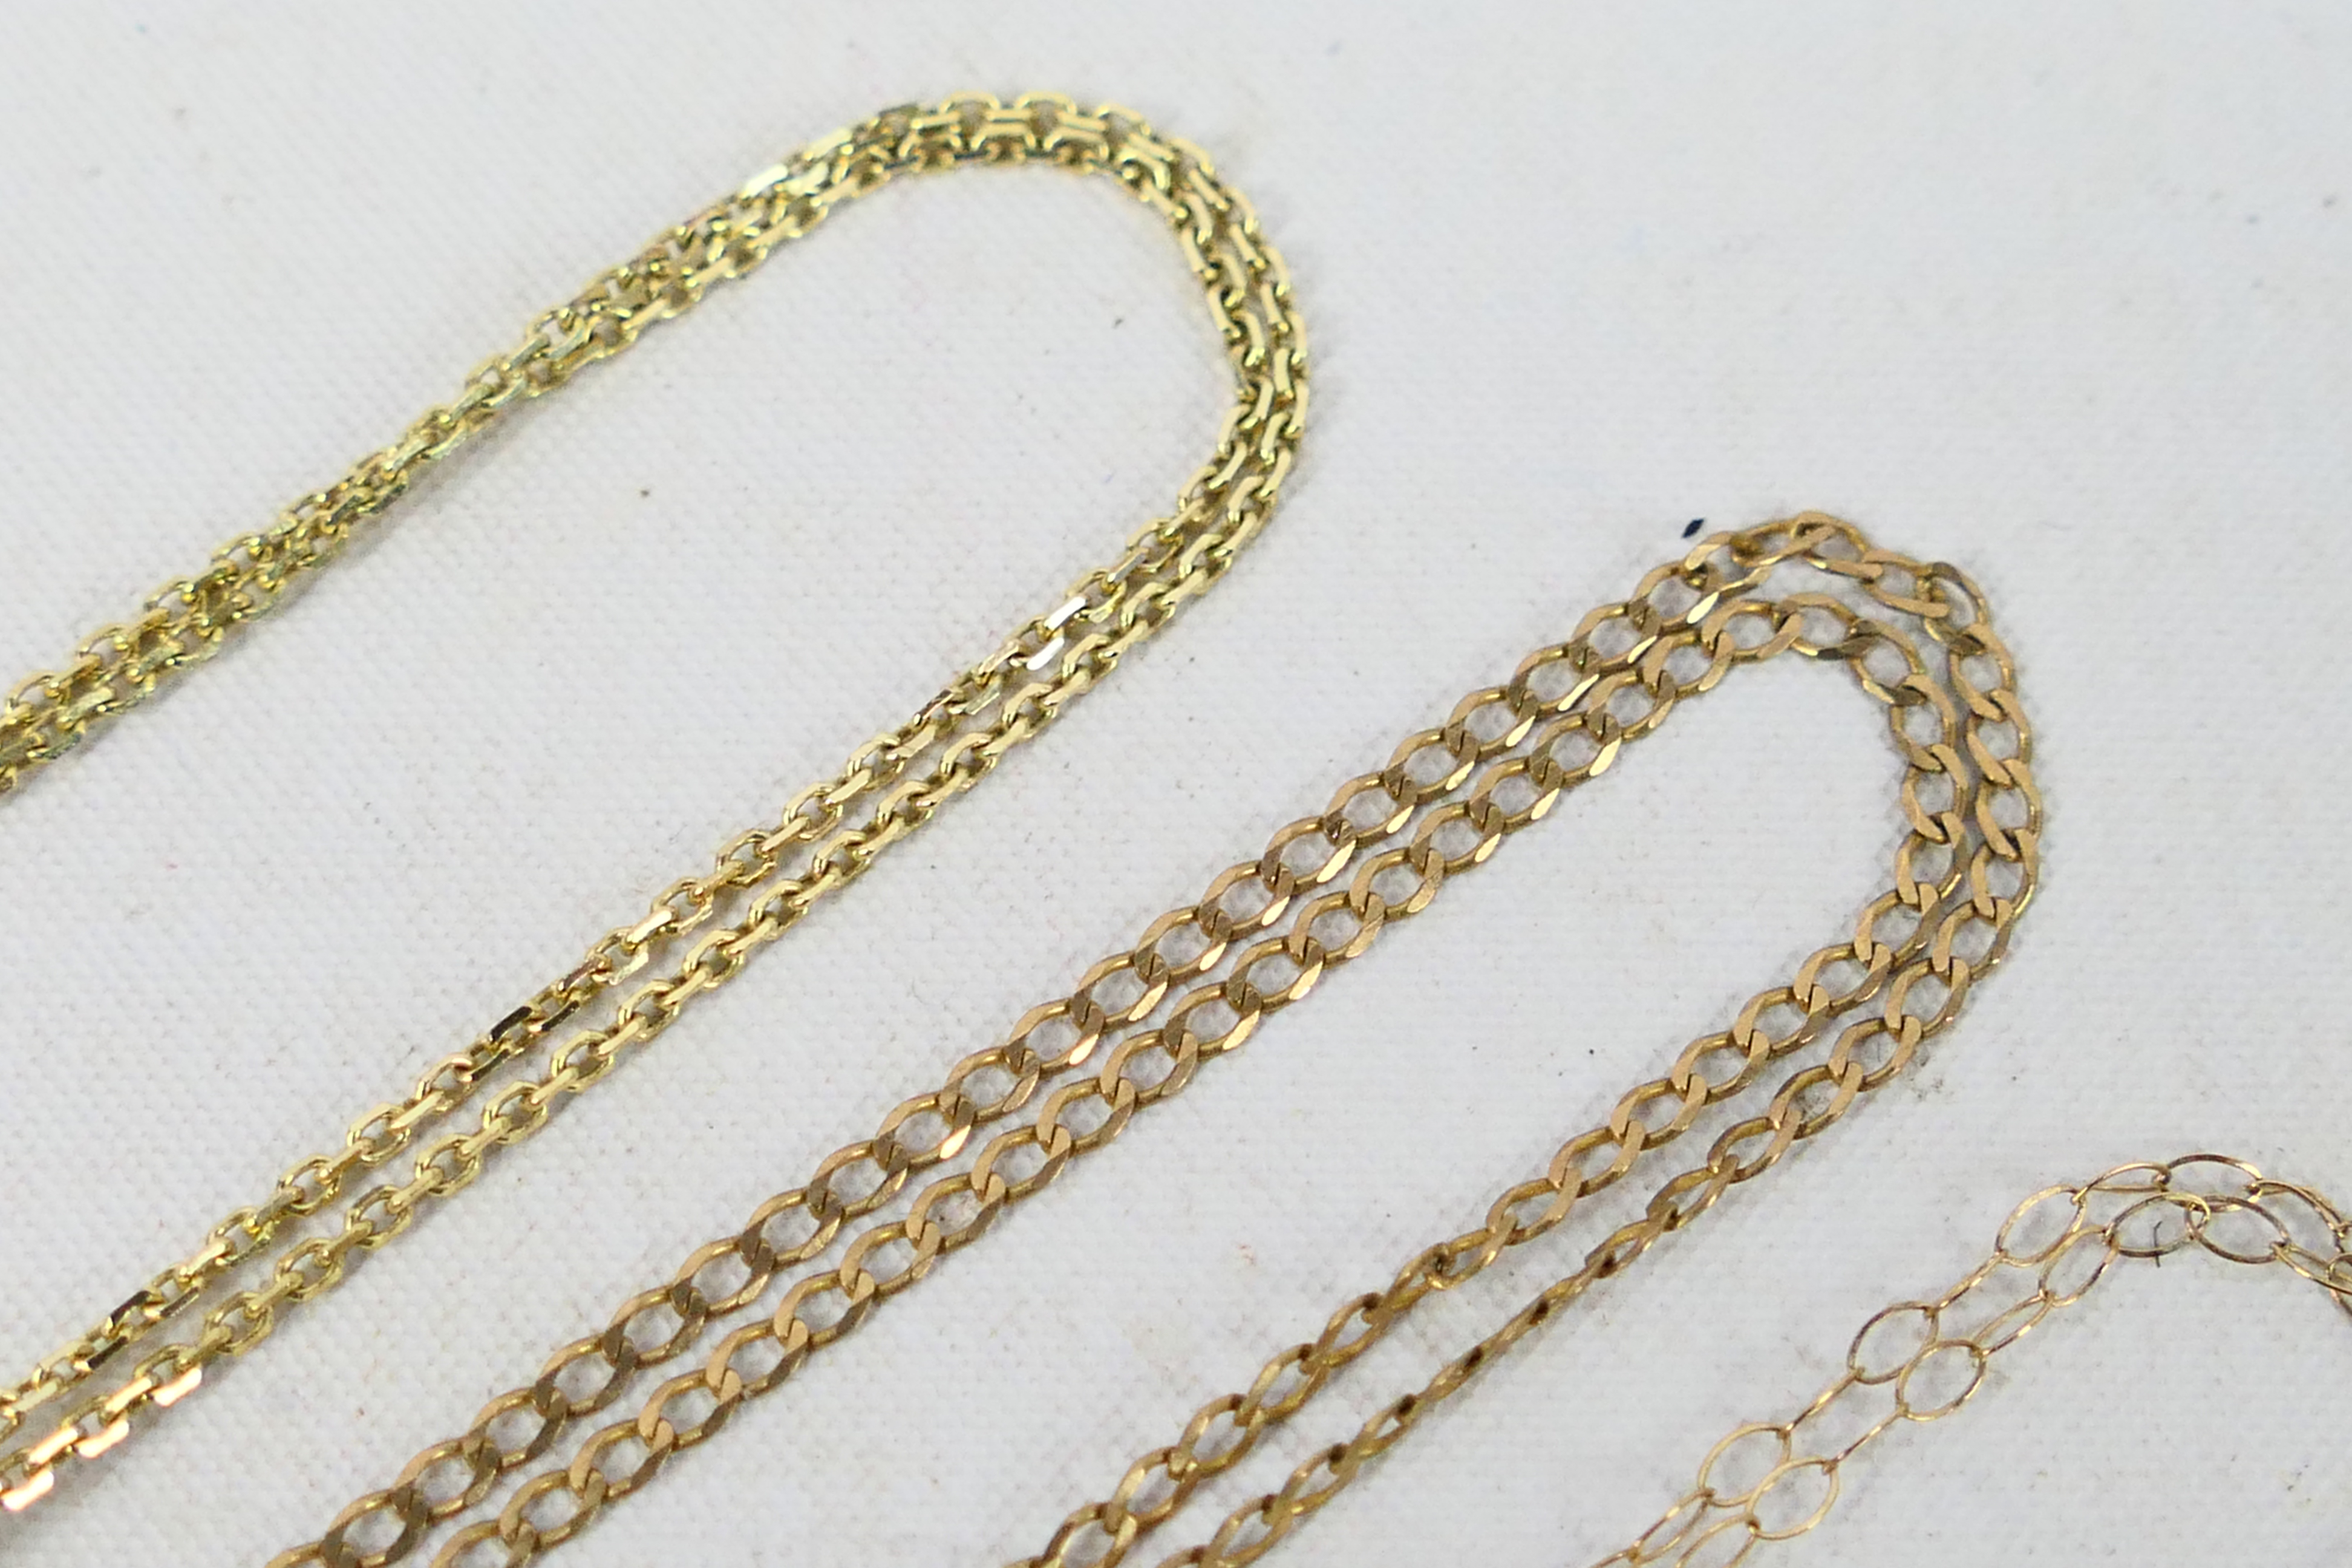 Four fine trace necklace chains one with Special Mum pendant, - Image 2 of 5